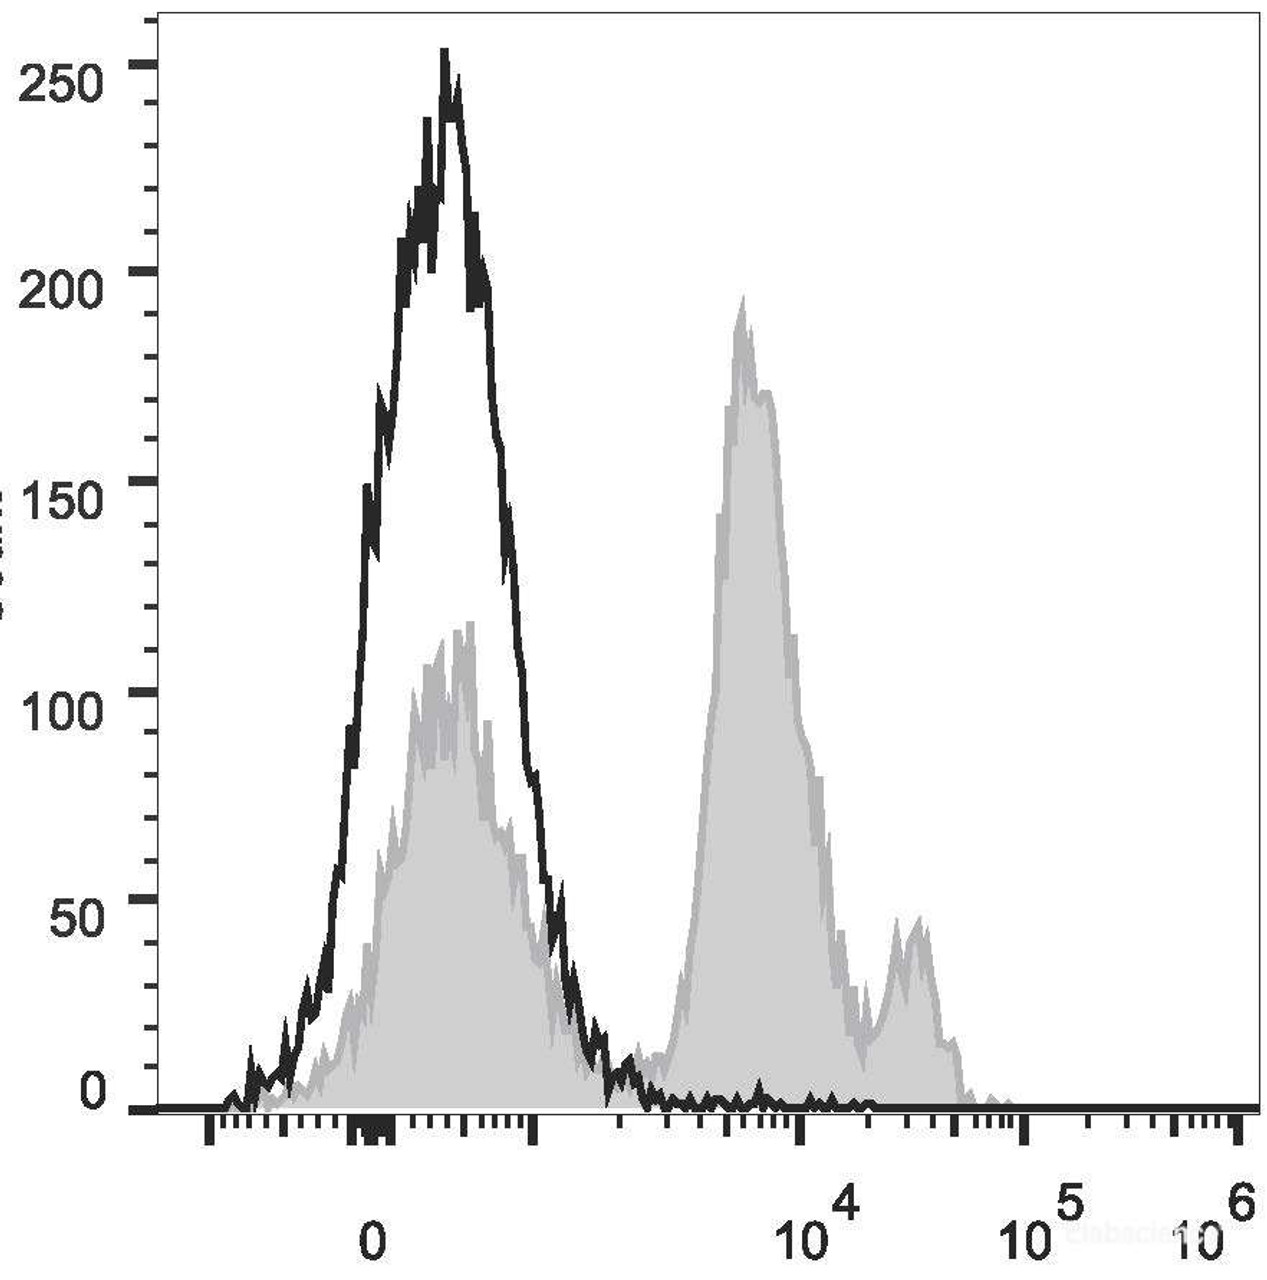 C57BL/6 murine bone marrow cells are stained with PE/Cyanine5 Anti-Mouse Ly6C Antibody(filled gray histogram). Unstained bone marrow cells (empty black histogram) are used as control.